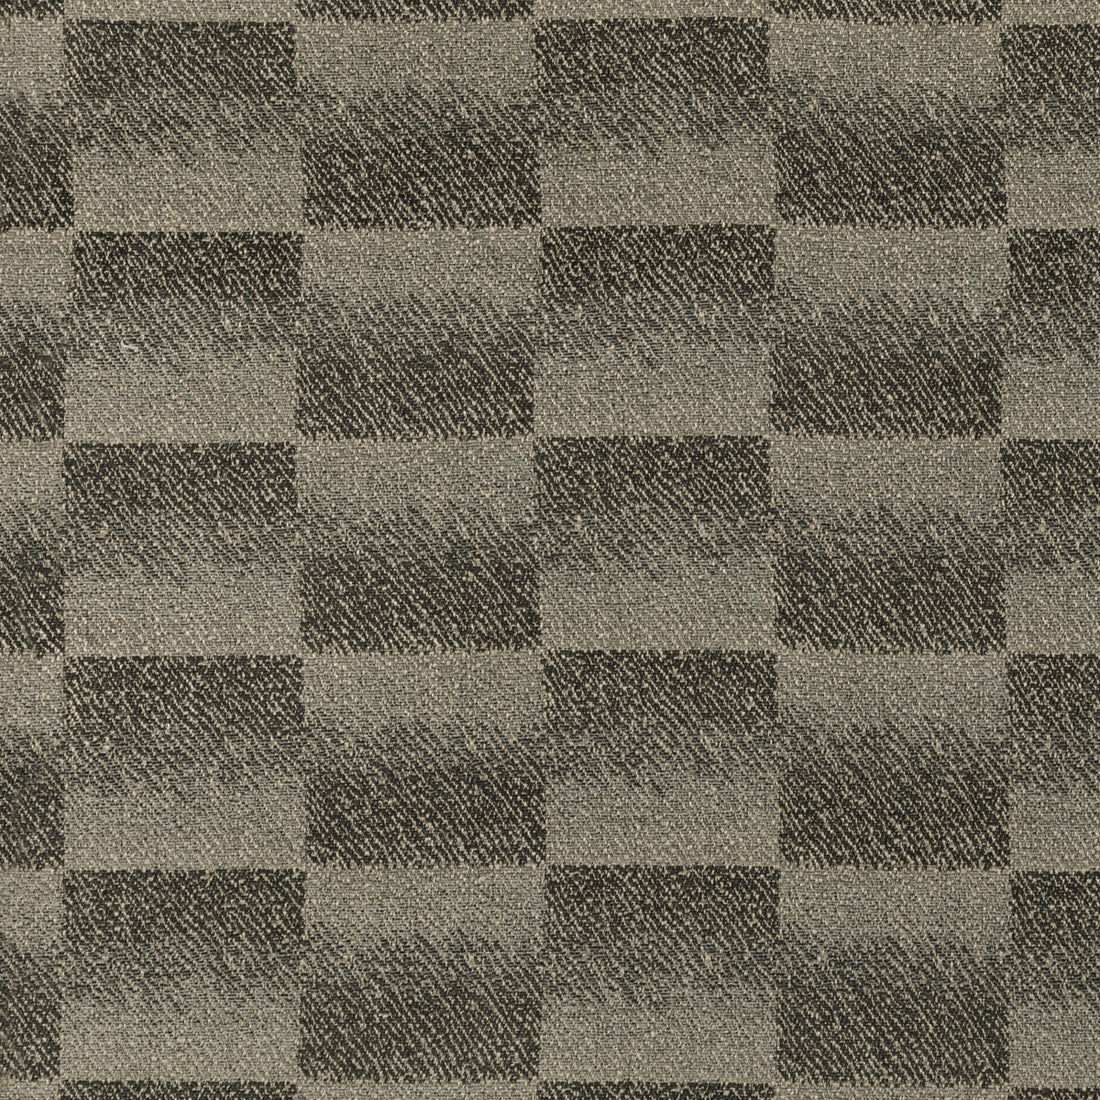 Surge fabric in charcoal color - pattern GWF-3762.21.0 - by Lee Jofa Modern in the Kelly Wearstler VI collection